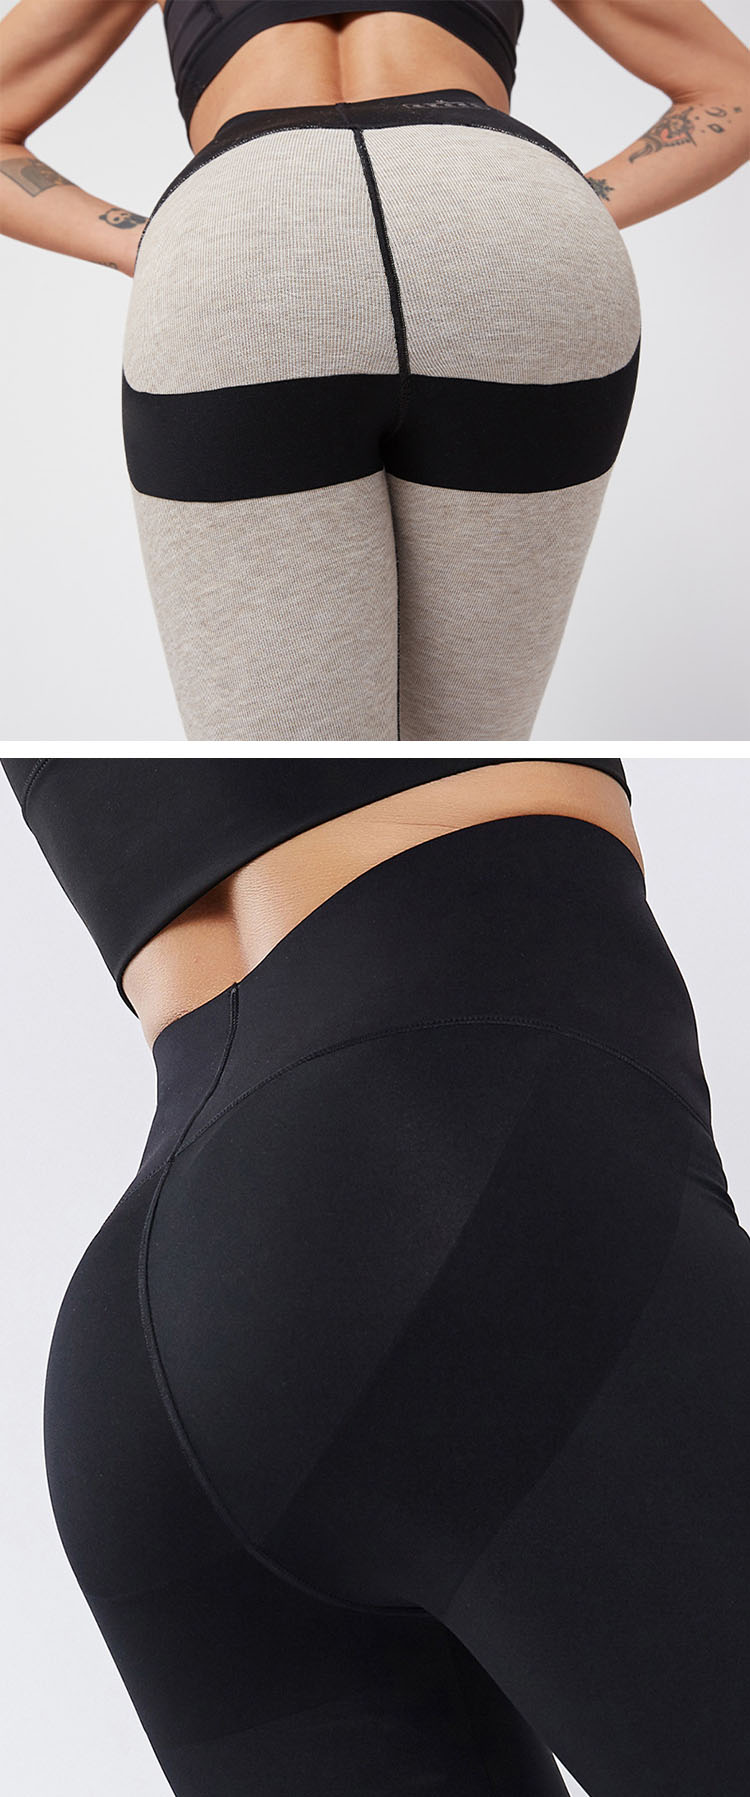 The unique design of the buttocks can achieve the effect of lifting the buttocks and creating a peach buttocks.